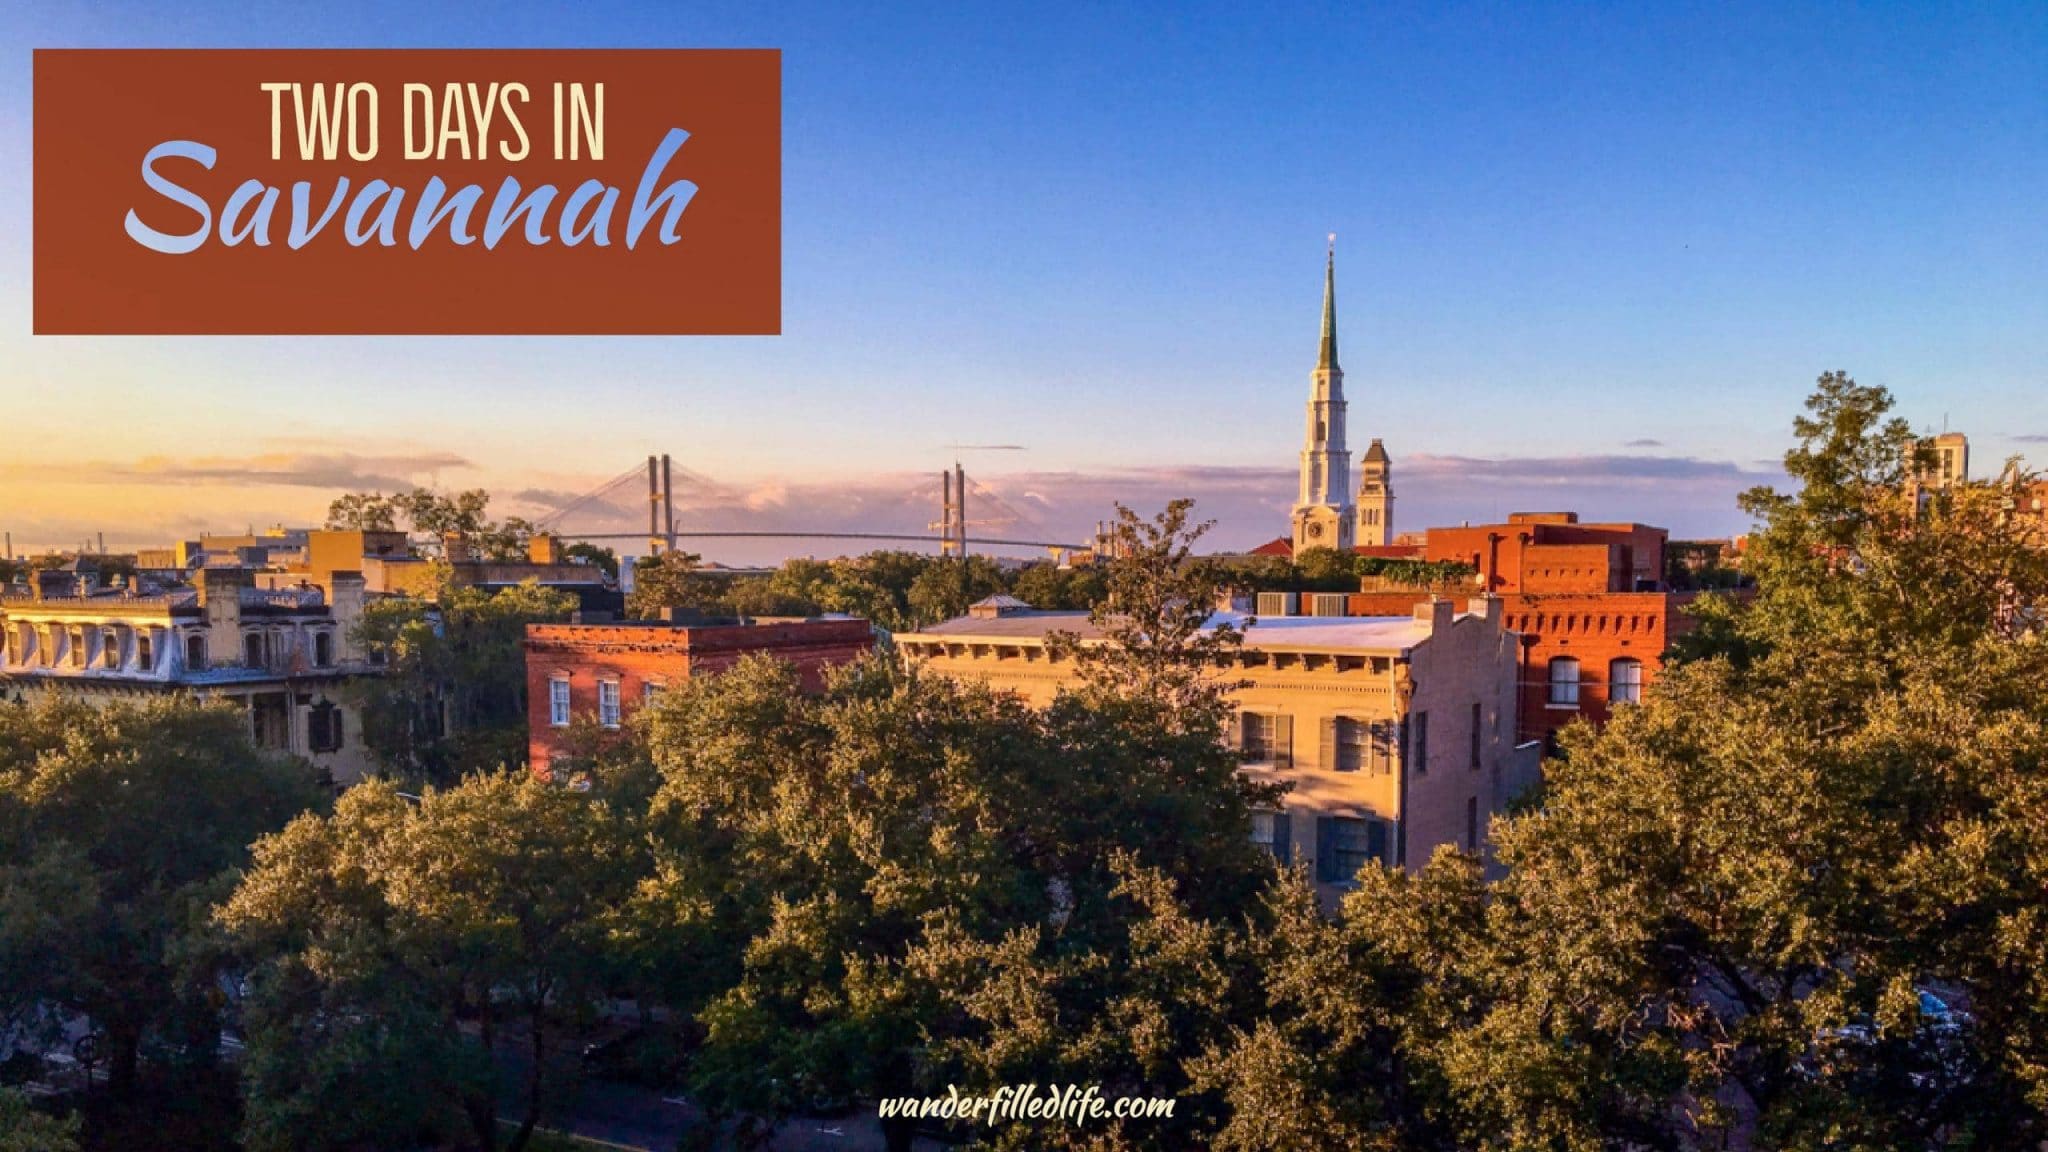 Two Days in Savannah